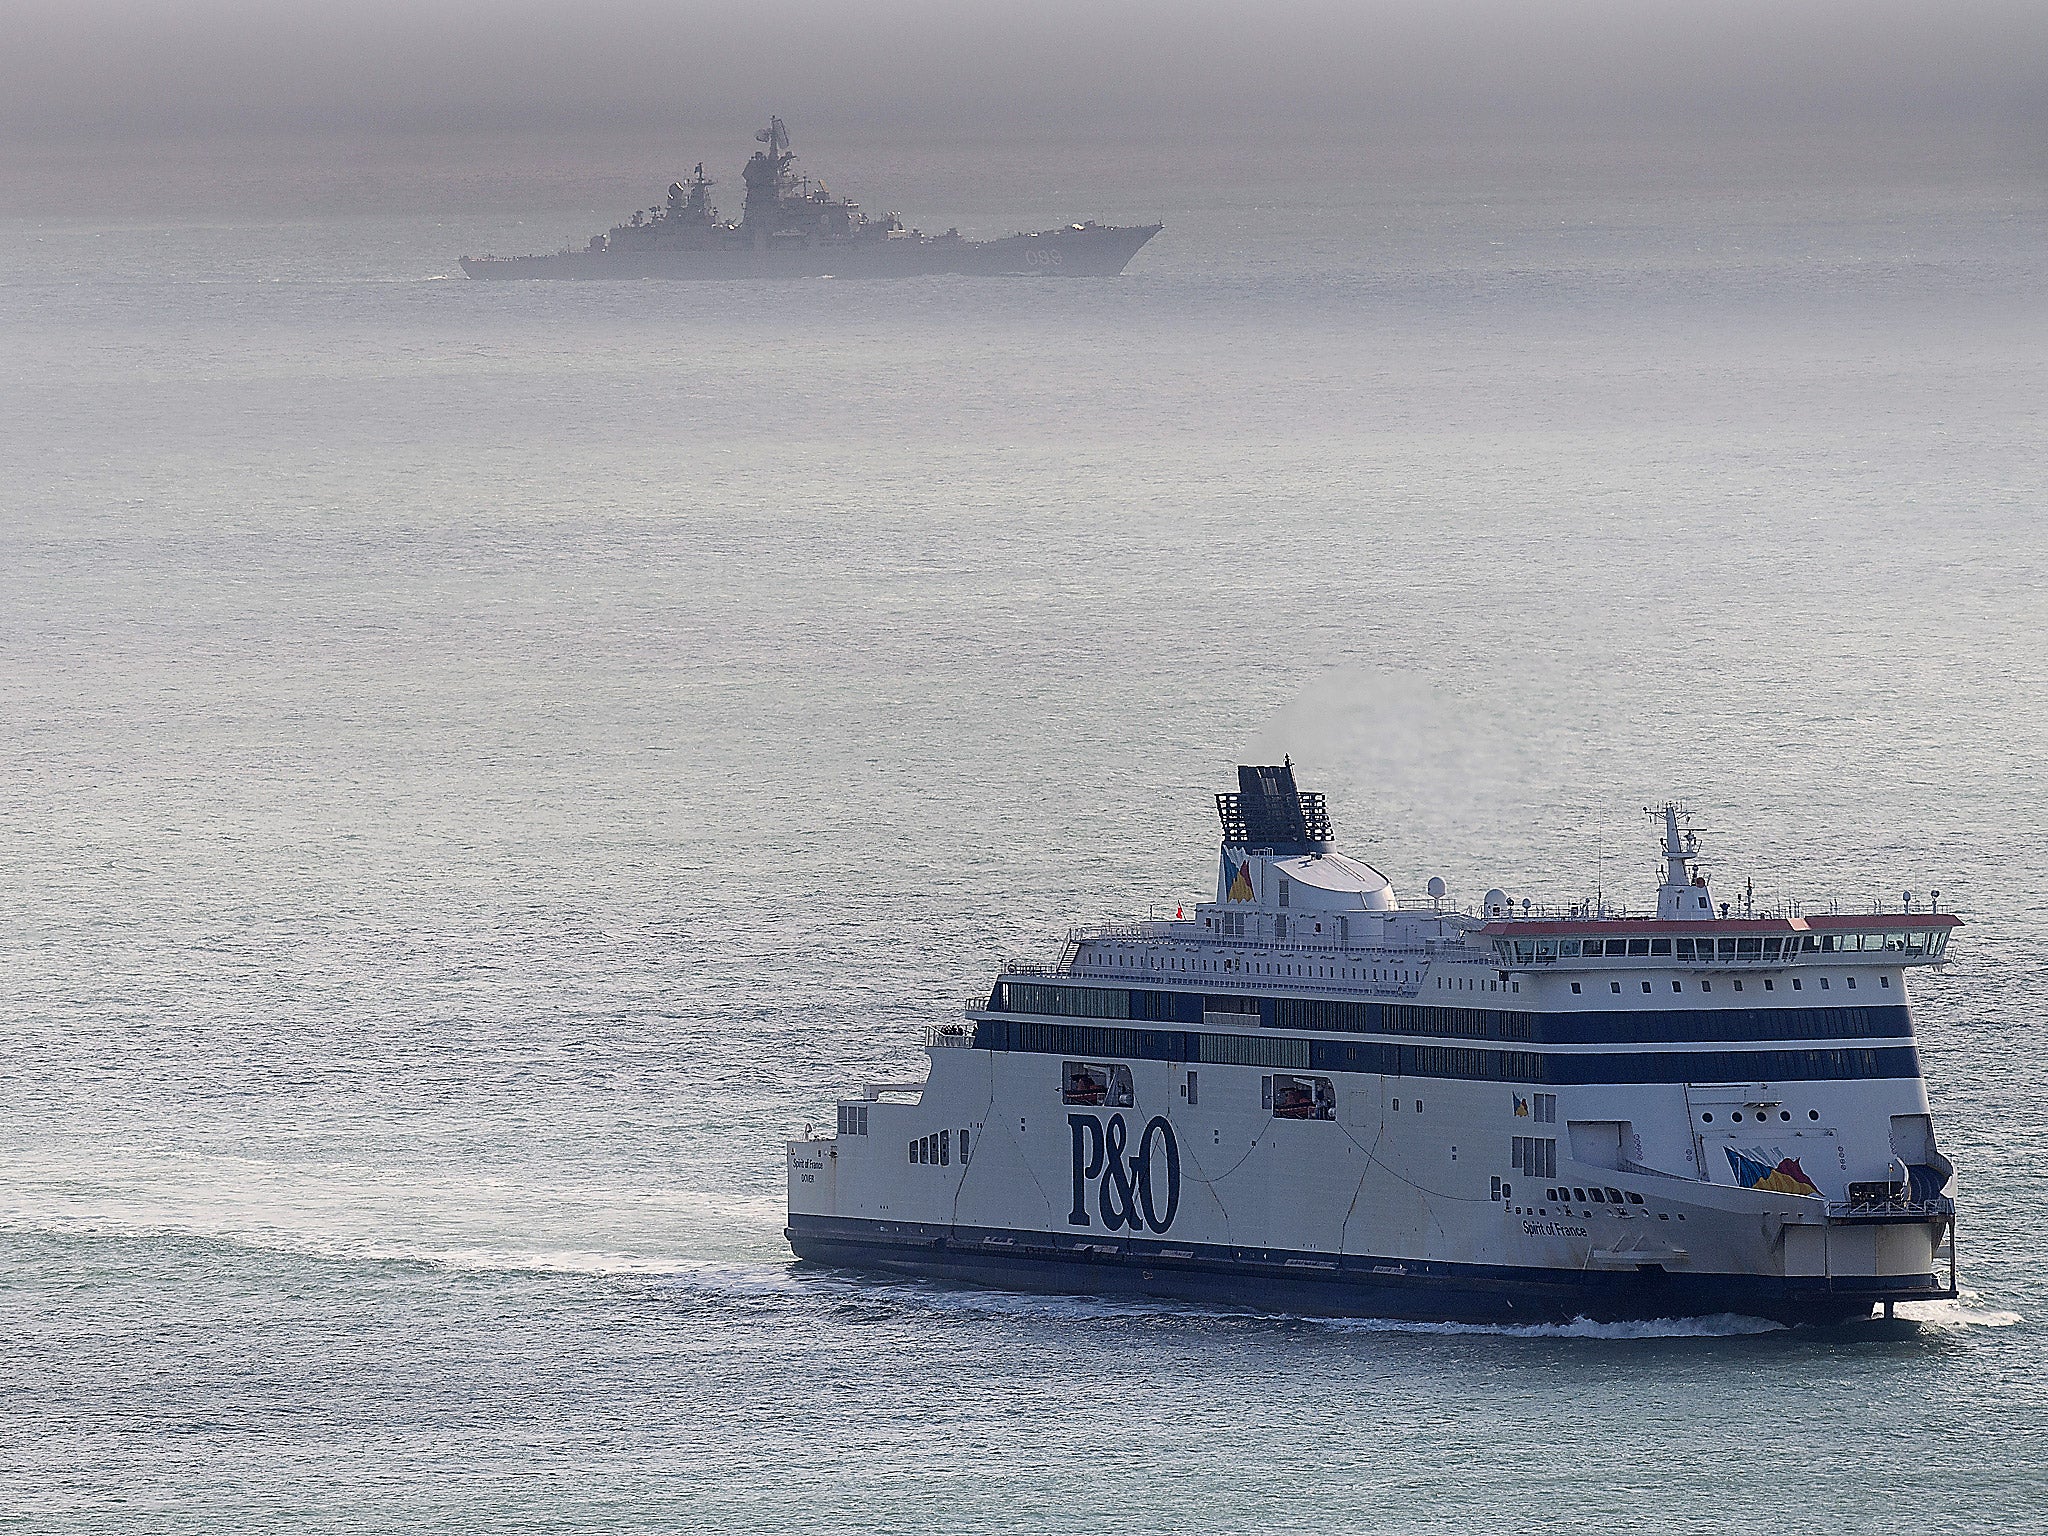 A Russian Naval vessel passes a ferry in the English Channel